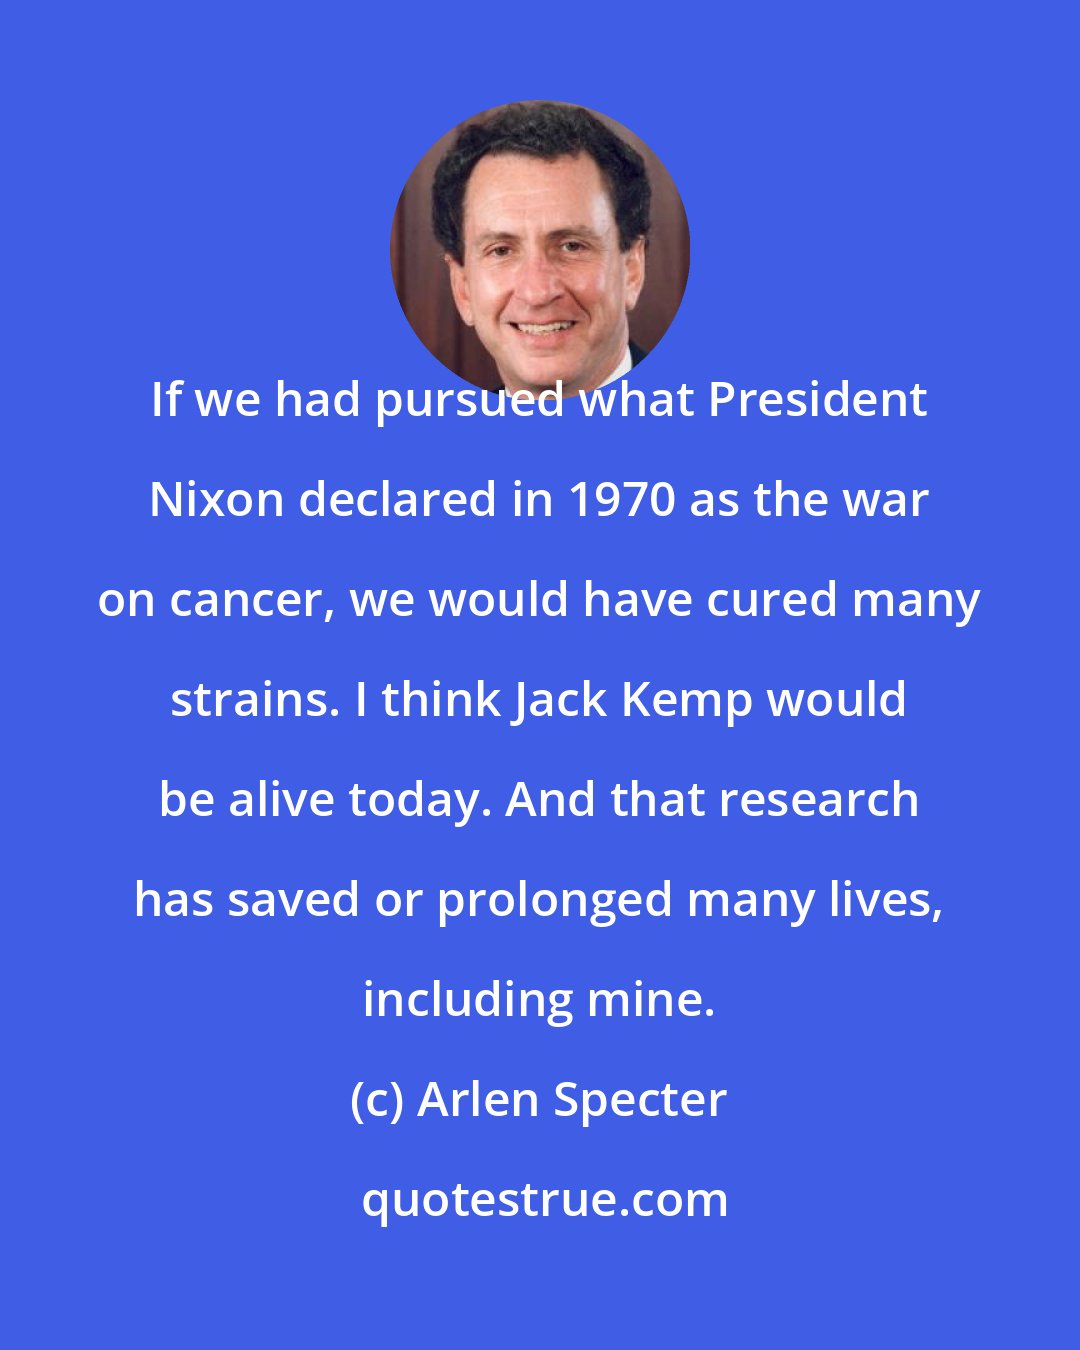 Arlen Specter: If we had pursued what President Nixon declared in 1970 as the war on cancer, we would have cured many strains. I think Jack Kemp would be alive today. And that research has saved or prolonged many lives, including mine.